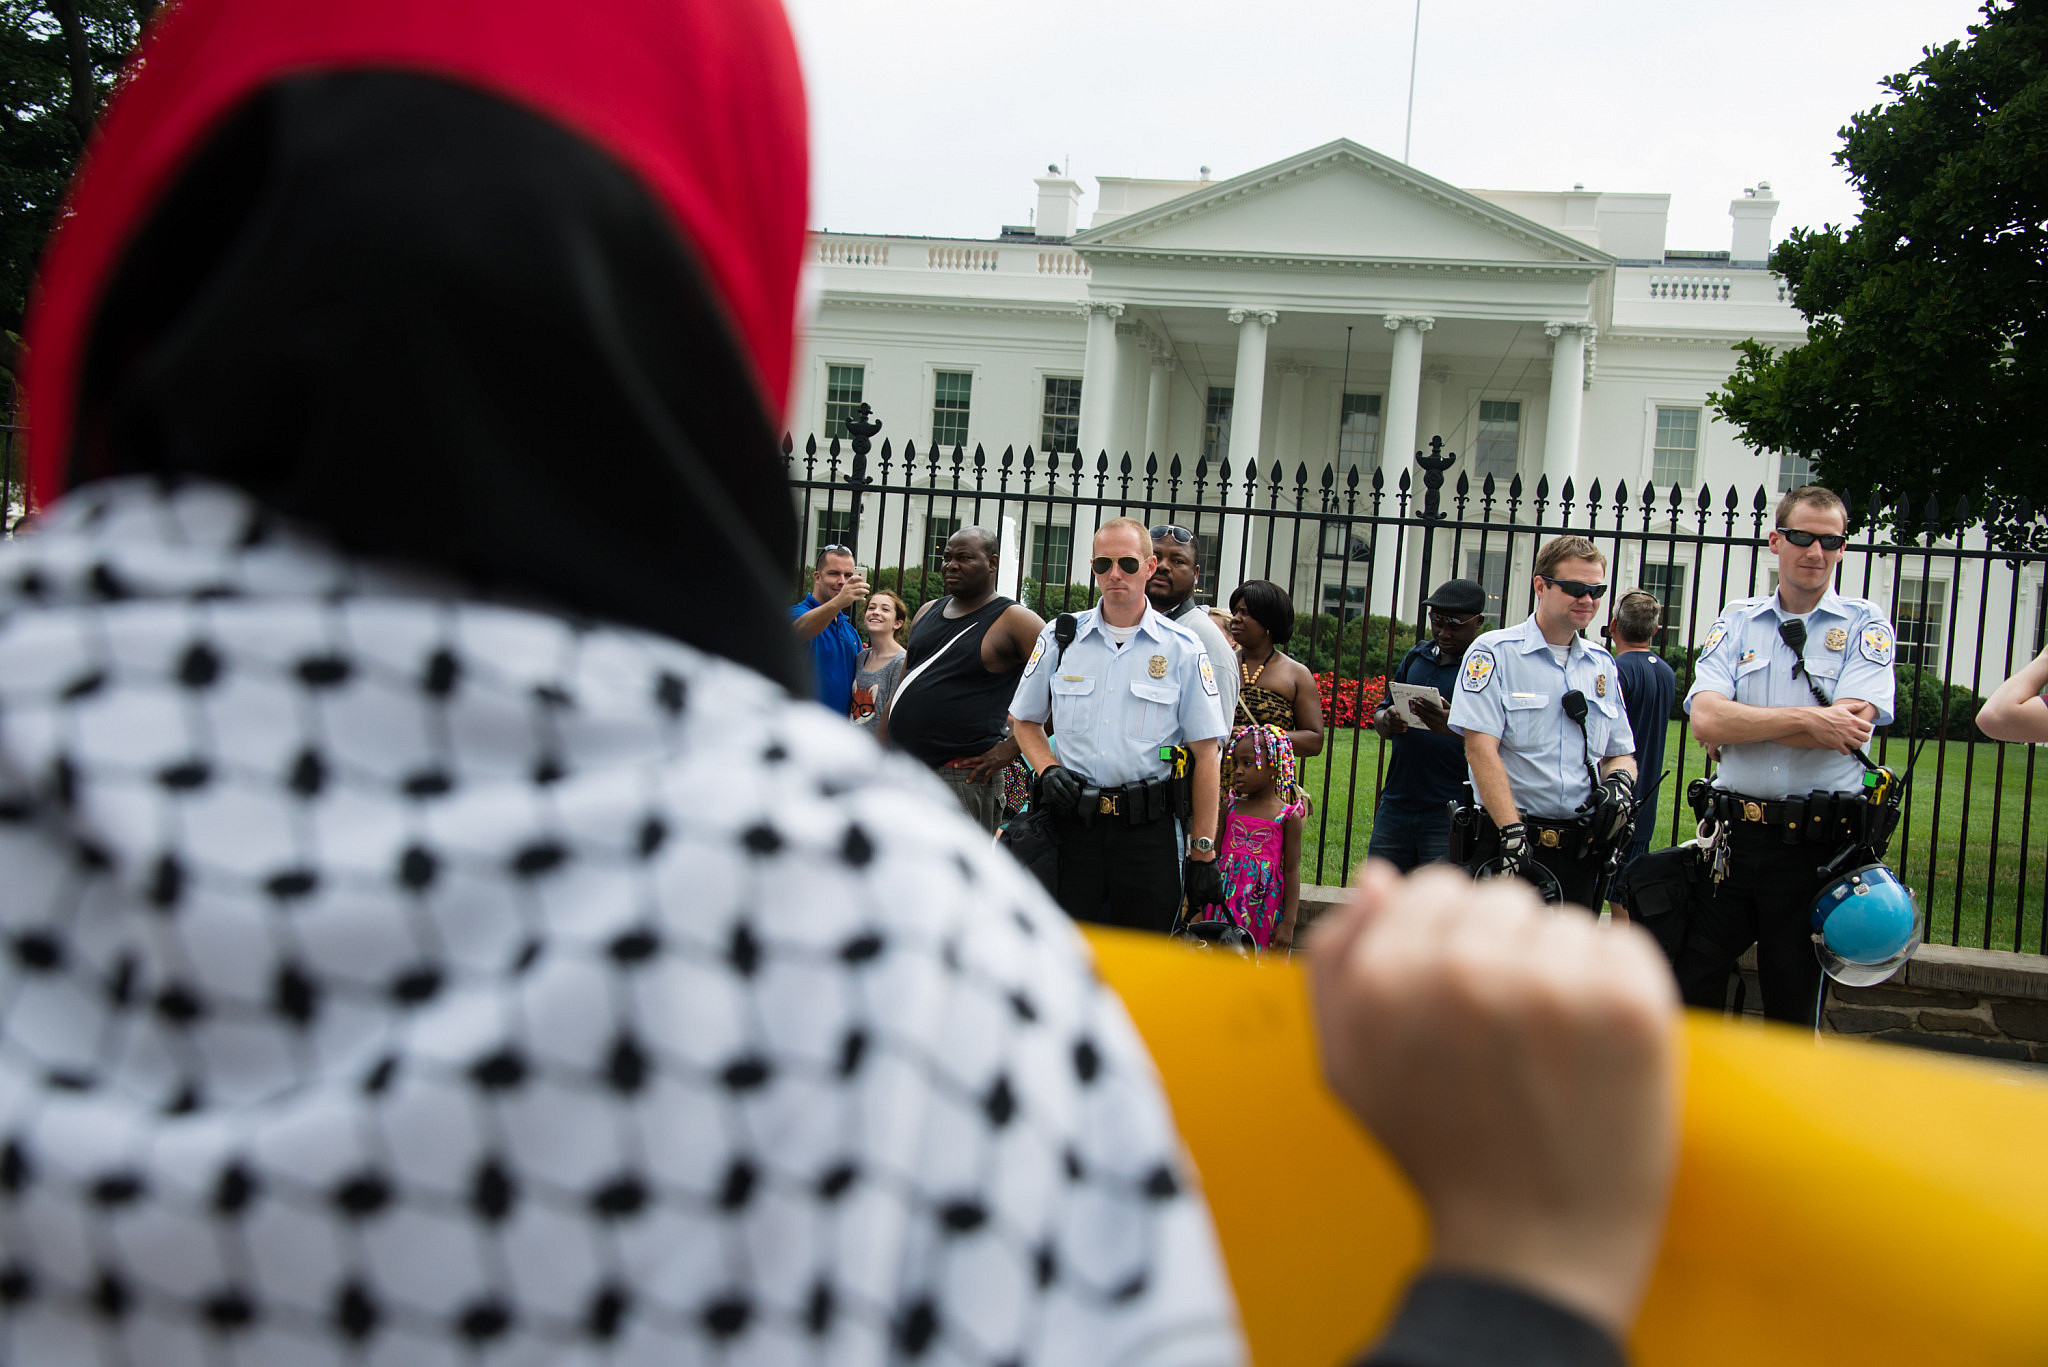 Activists protest Israel's attacks on Gaza in front of the White House, Washington, DC, August 9, 2014. (Ryan Rodrick Beiler/Activestills.org)